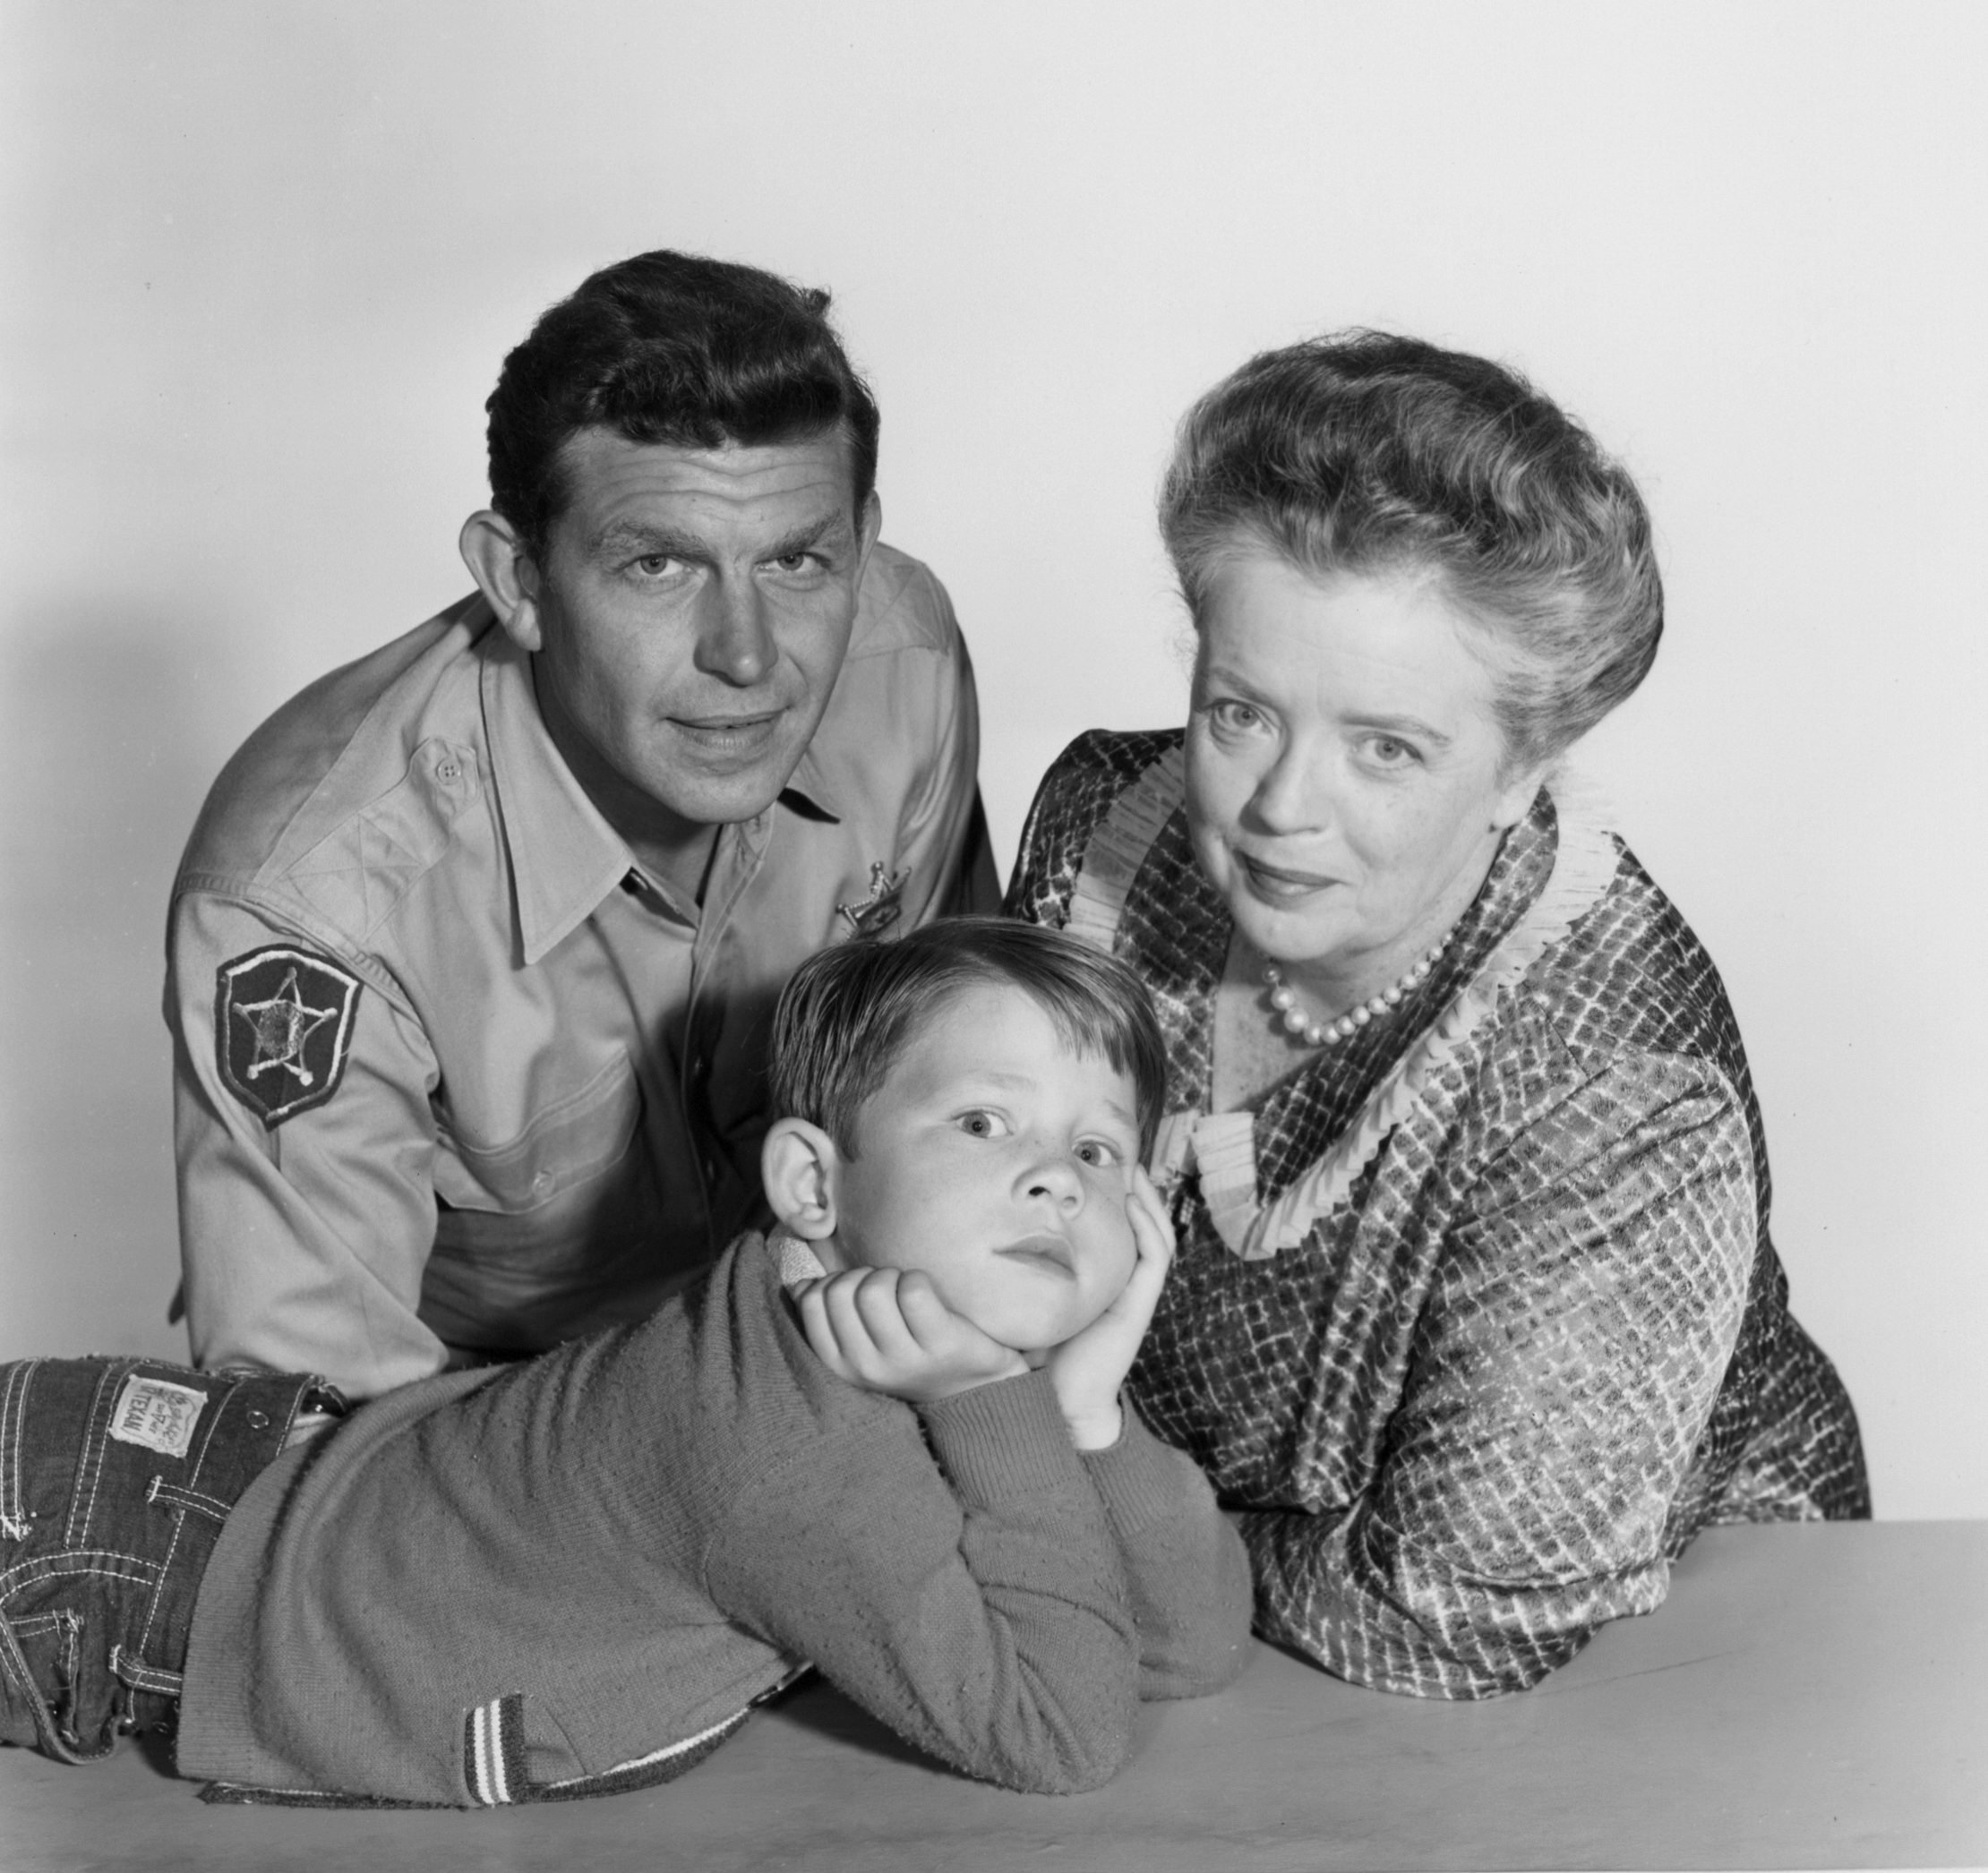 From left: Andy Griffith, Ron Howard, and Frances Bavier of 'The Andy Griffith Show'